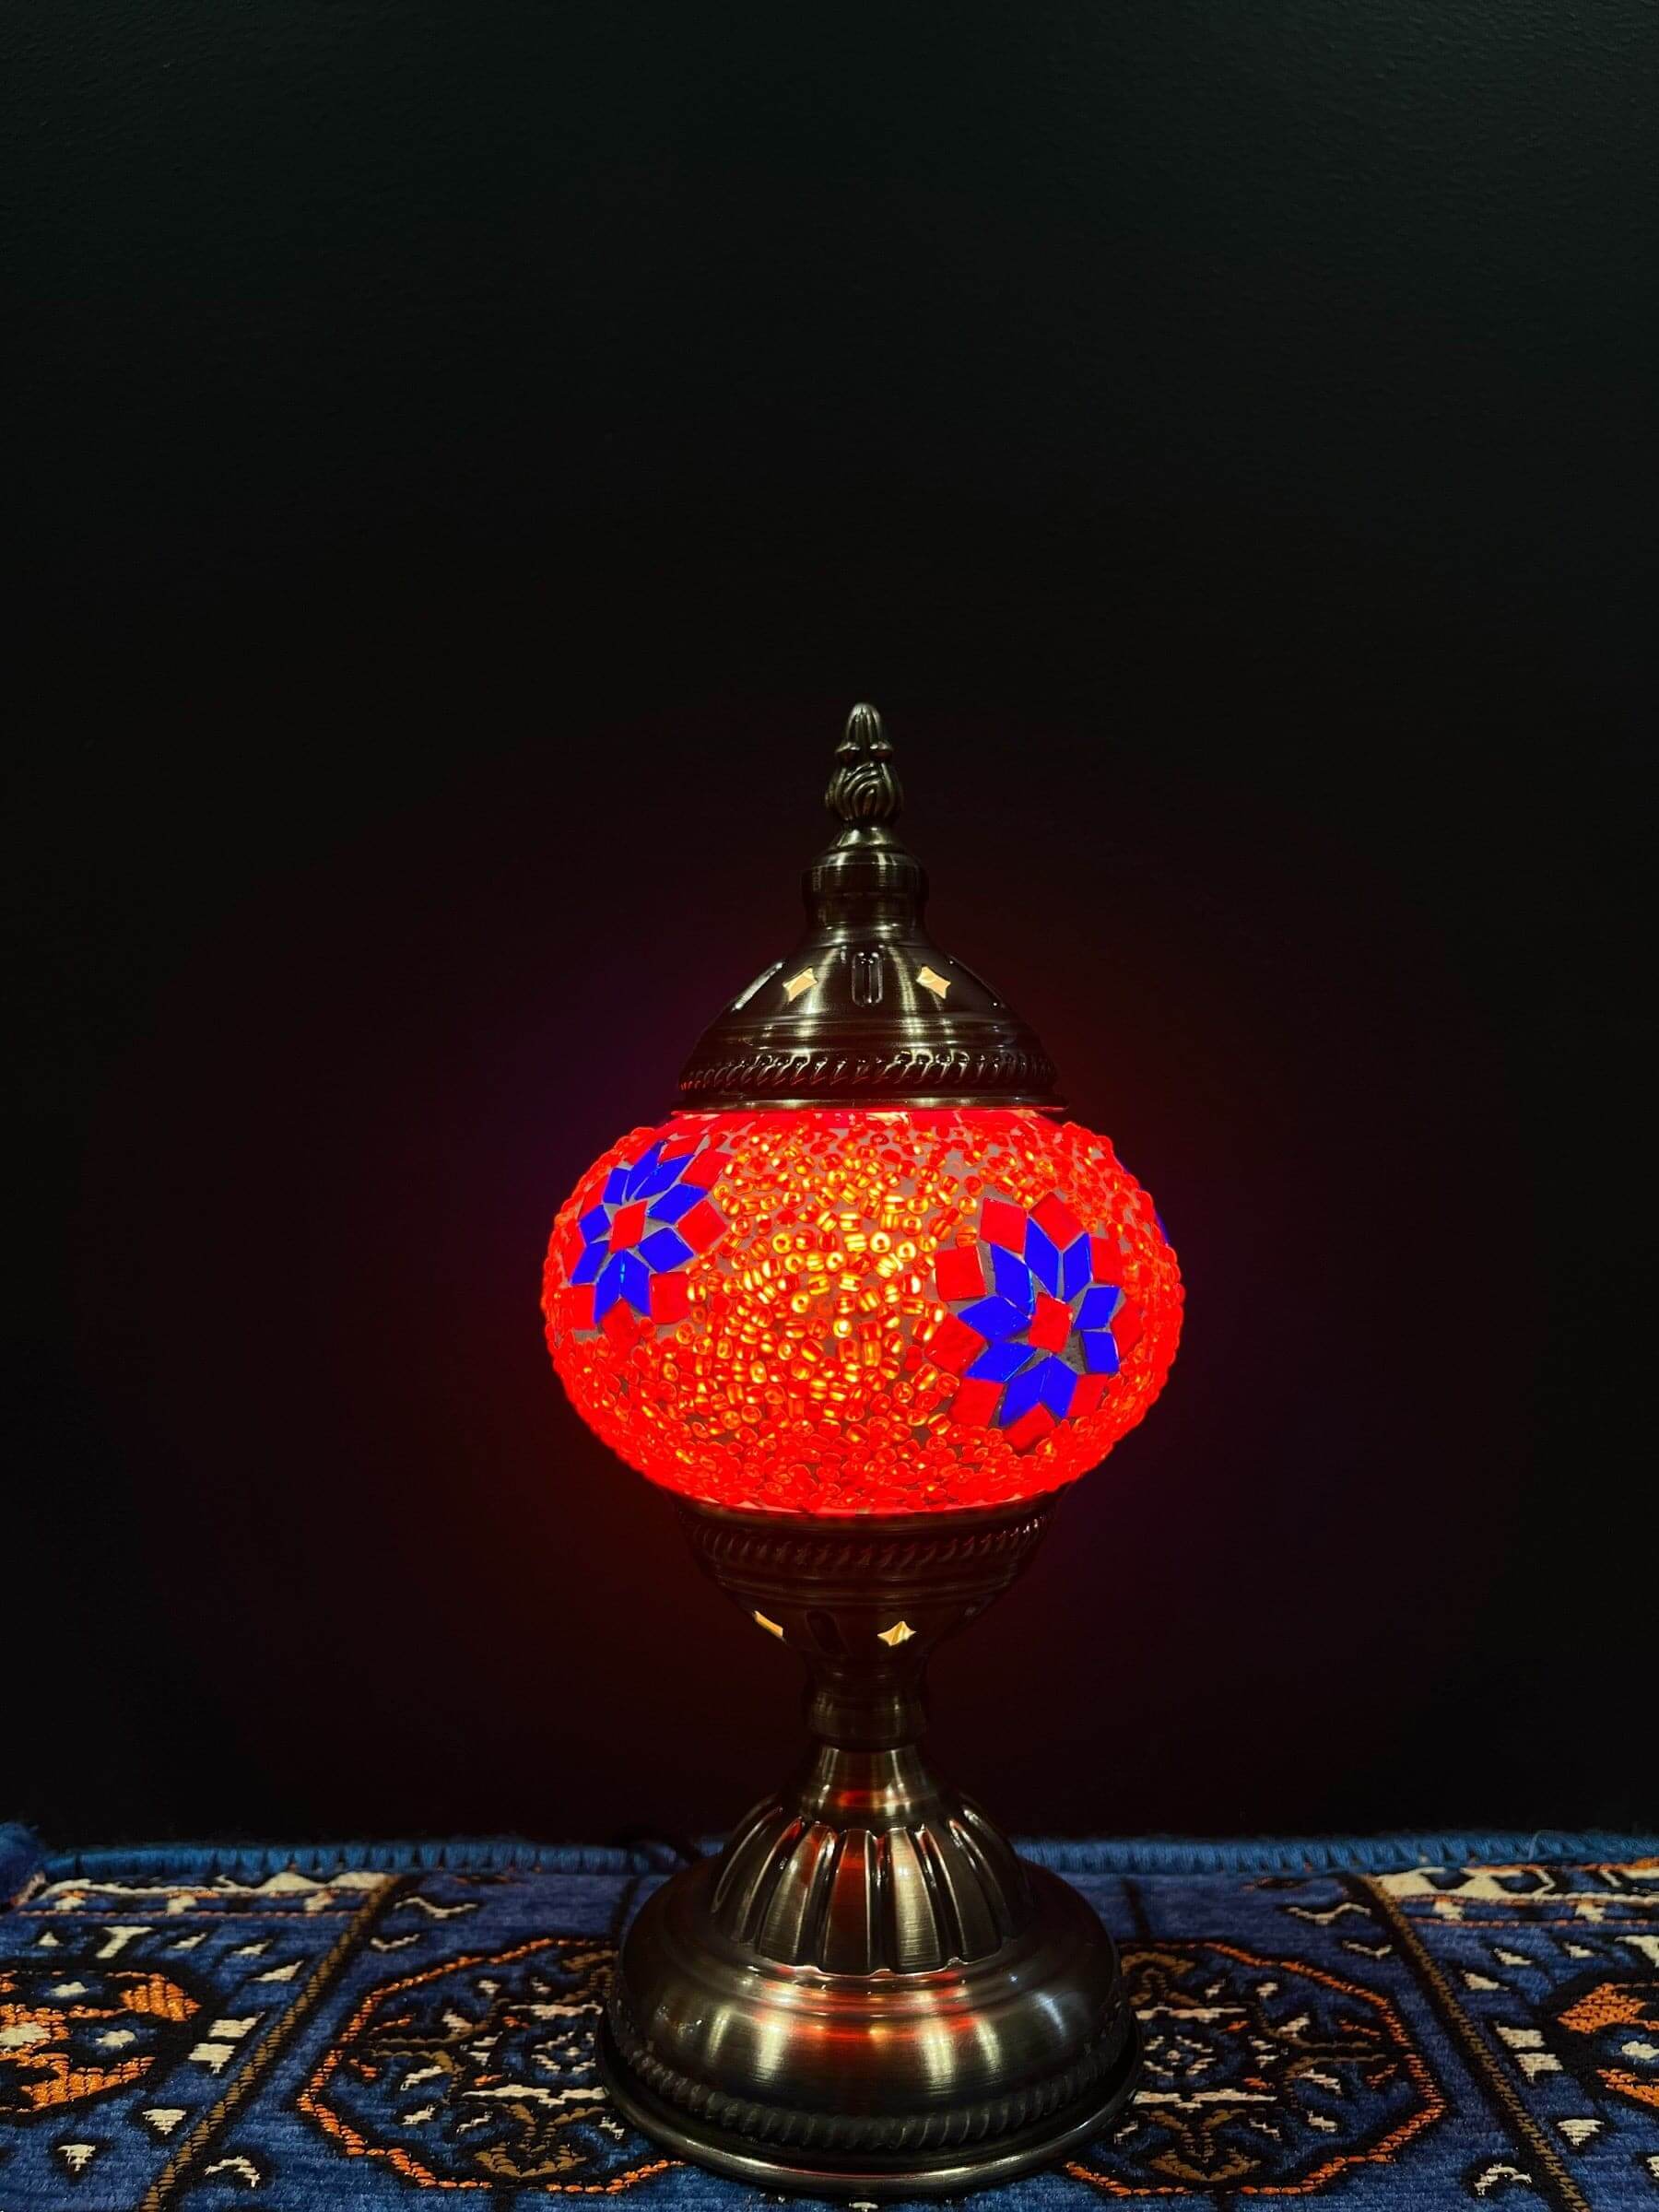 Mosaic Lamps: Unique and elegant decorative lighting fixtures featuring mosaic designs crafted from vibrant glass pieces. Add a touch of grace and charm to your space with these exquisite lamps, suitable for various settings. Explore our mosaic lamp colle